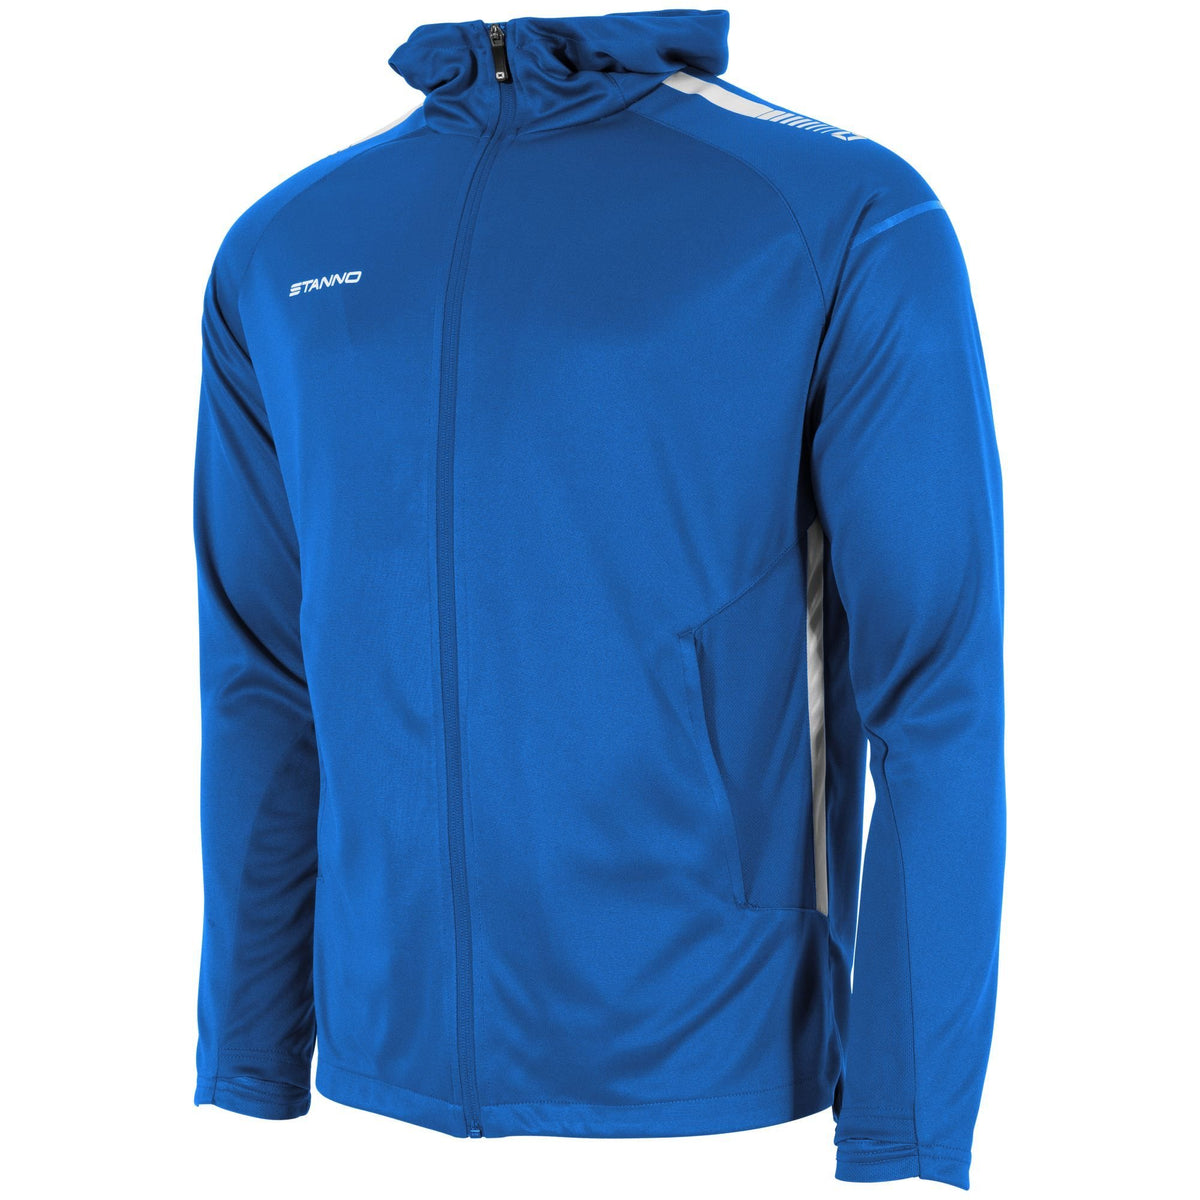 First Hooded Full Zip Top - Adult